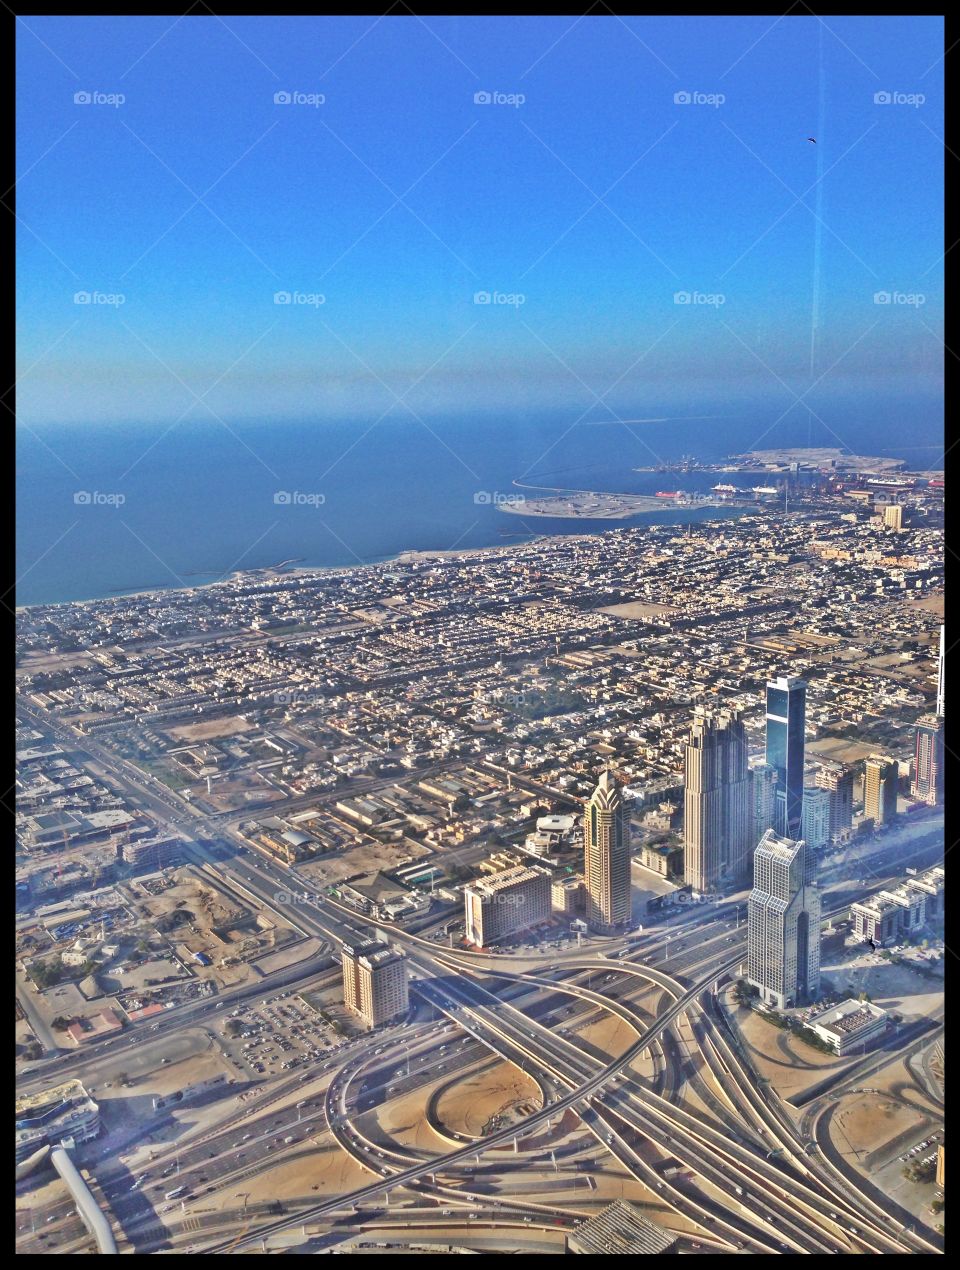 City By The Sea. Dubai and the Persian Gulf